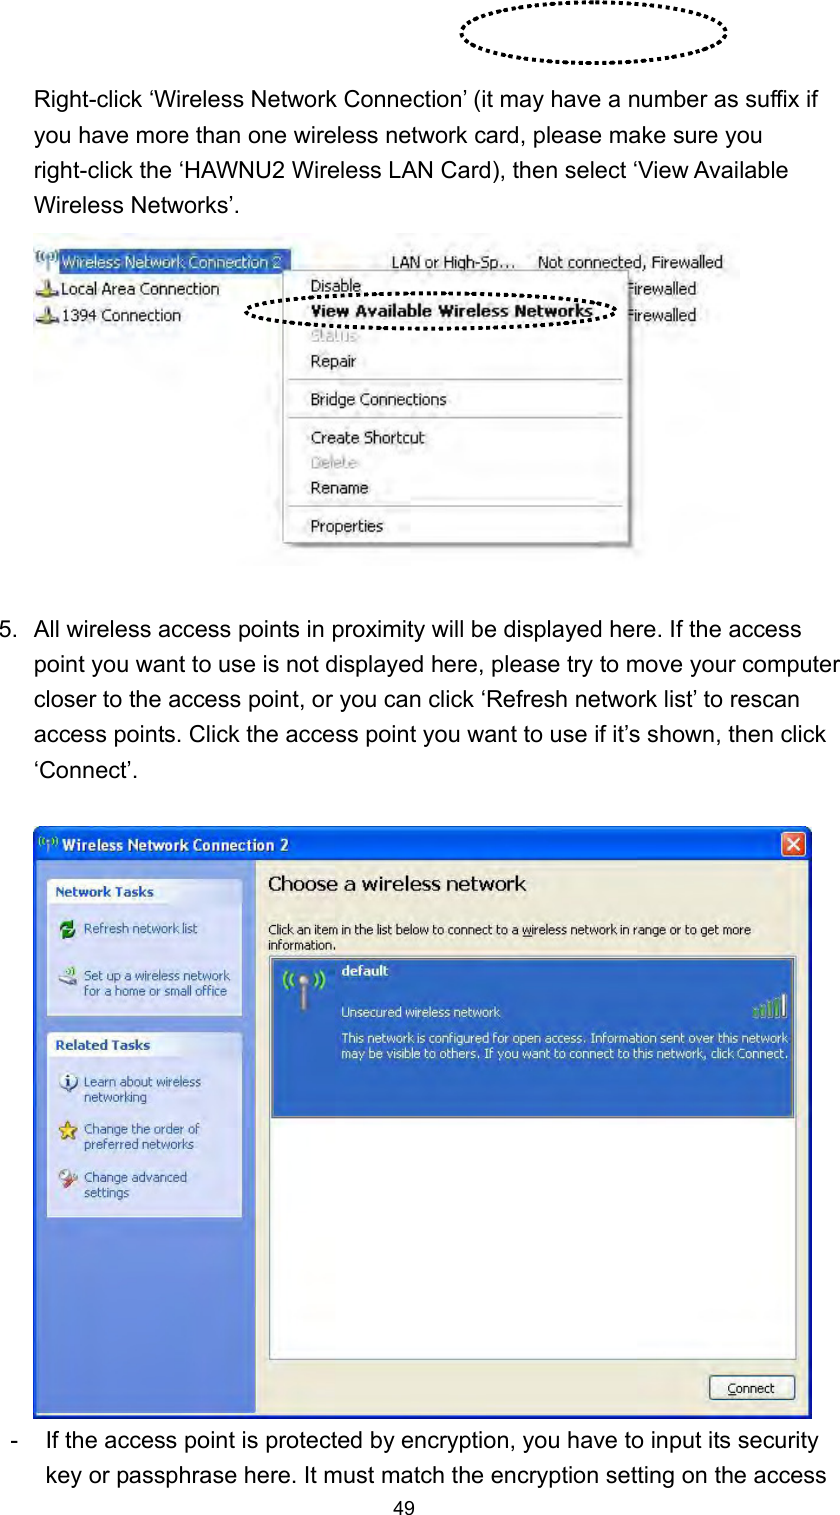  49 Right-click ‘Wireless Network Connection’ (it may have a number as suffix if you have more than one wireless network card, please make sure you right-click the ‘HAWNU2 Wireless LAN Card), then select ‘View Available Wireless Networks’.   5.  All wireless access points in proximity will be displayed here. If the access point you want to use is not displayed here, please try to move your computer closer to the access point, or you can click ‘Refresh network list’ to rescan access points. Click the access point you want to use if it’s shown, then click ‘Connect’.   -  If the access point is protected by encryption, you have to input its security key or passphrase here. It must match the encryption setting on the access 